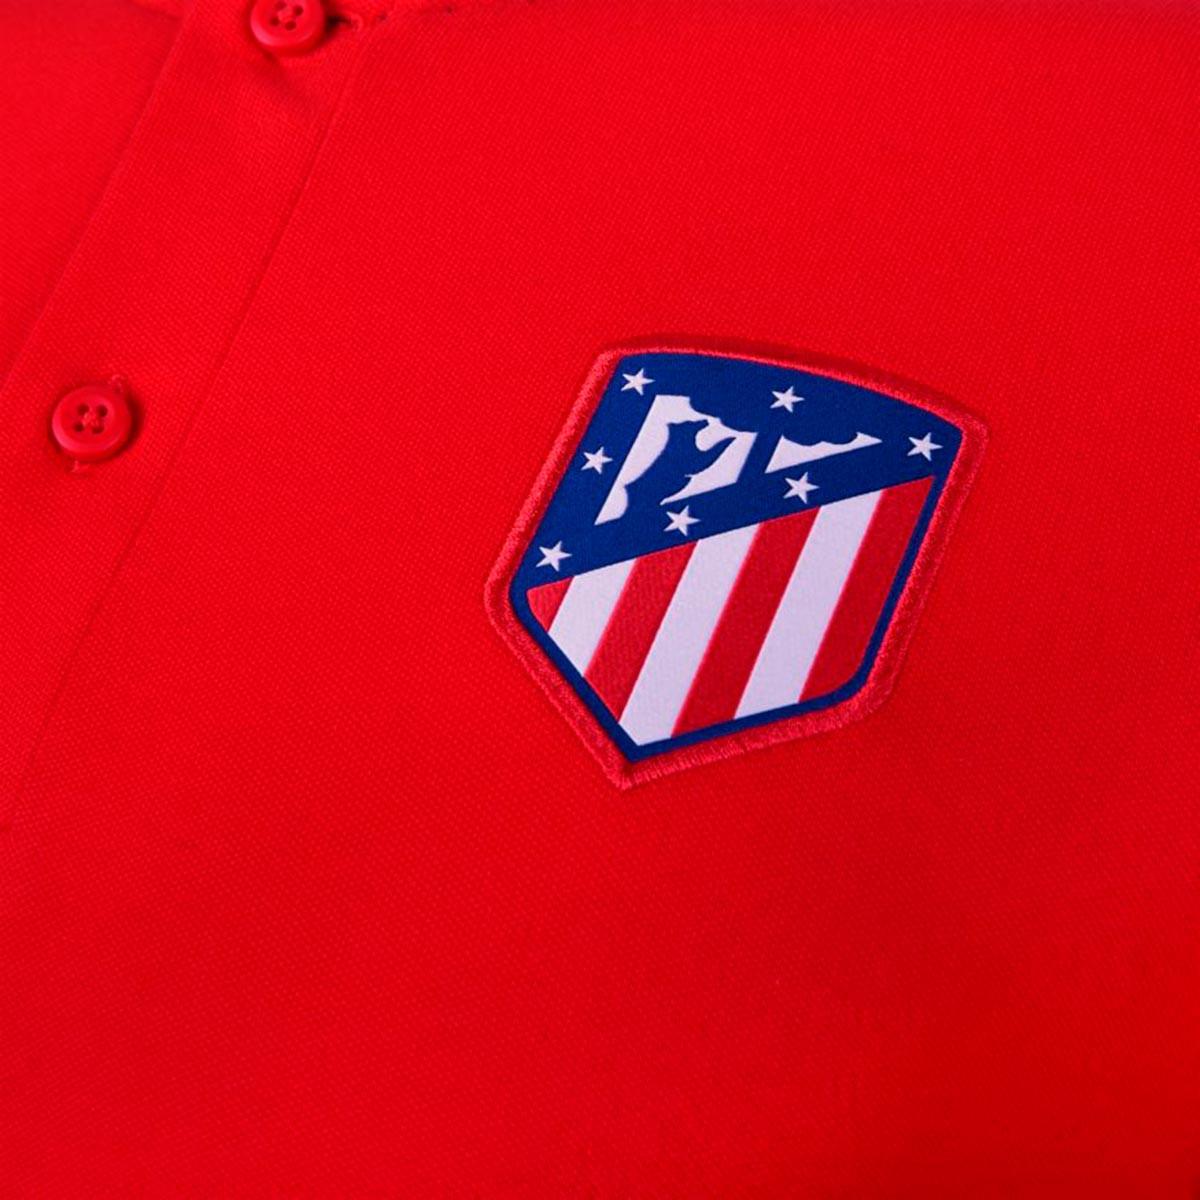 atletico madrid inoted states 2019